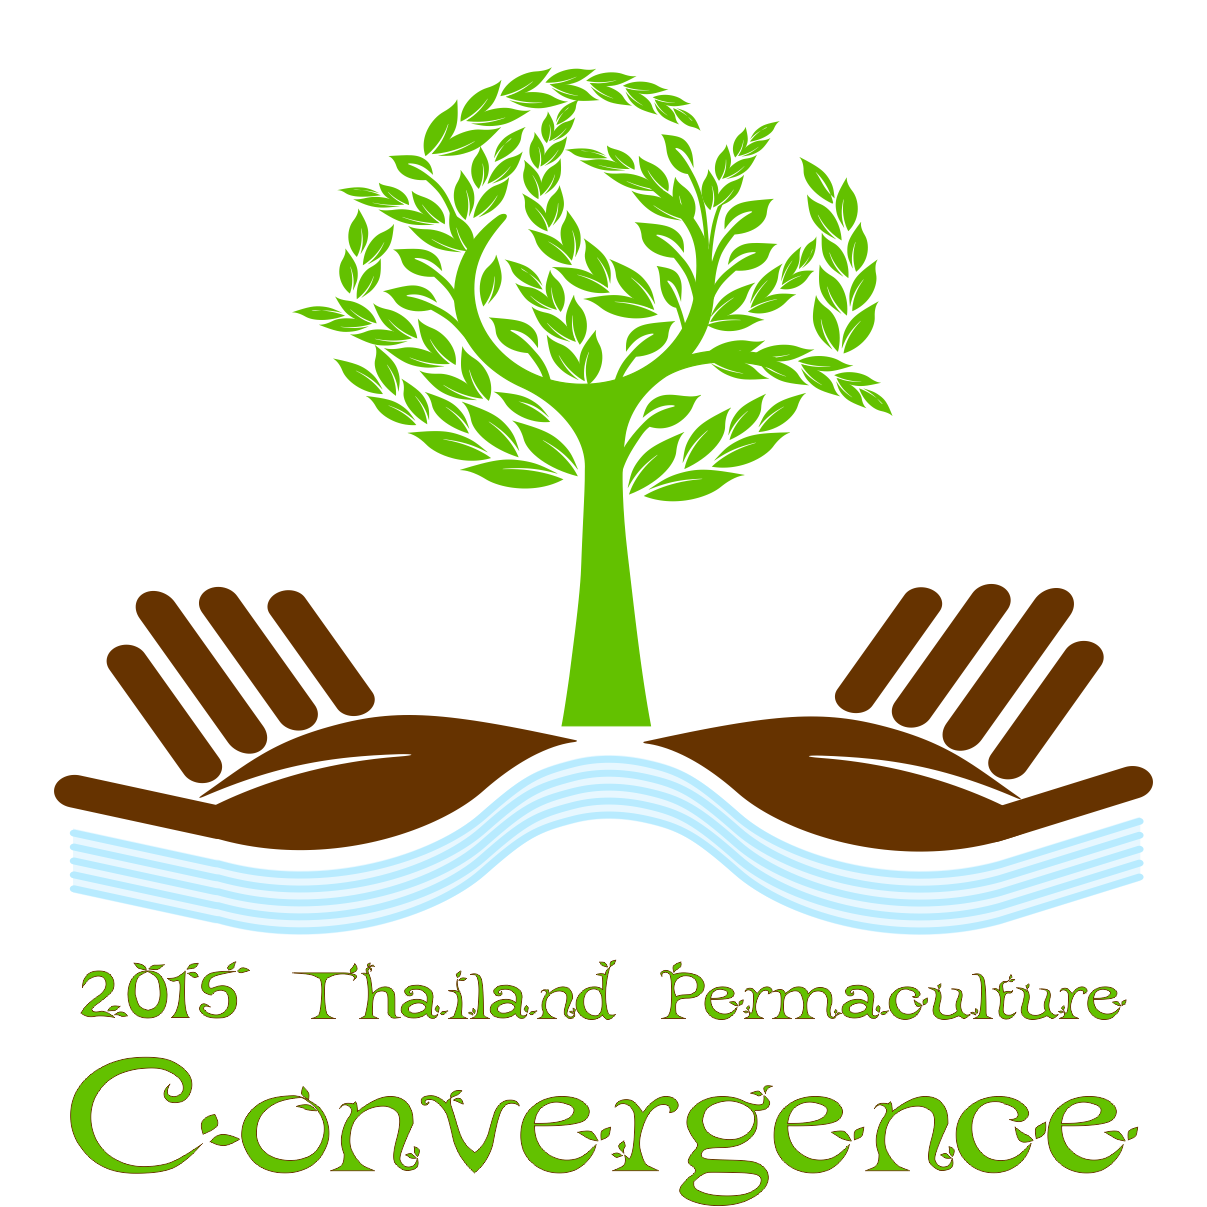 Join the 2015 Thailand Permaculture Convergence on March 26 - 28 - 2015 at Wanakaset Learning Center, Sanam Chai Khet, Chachoengsao